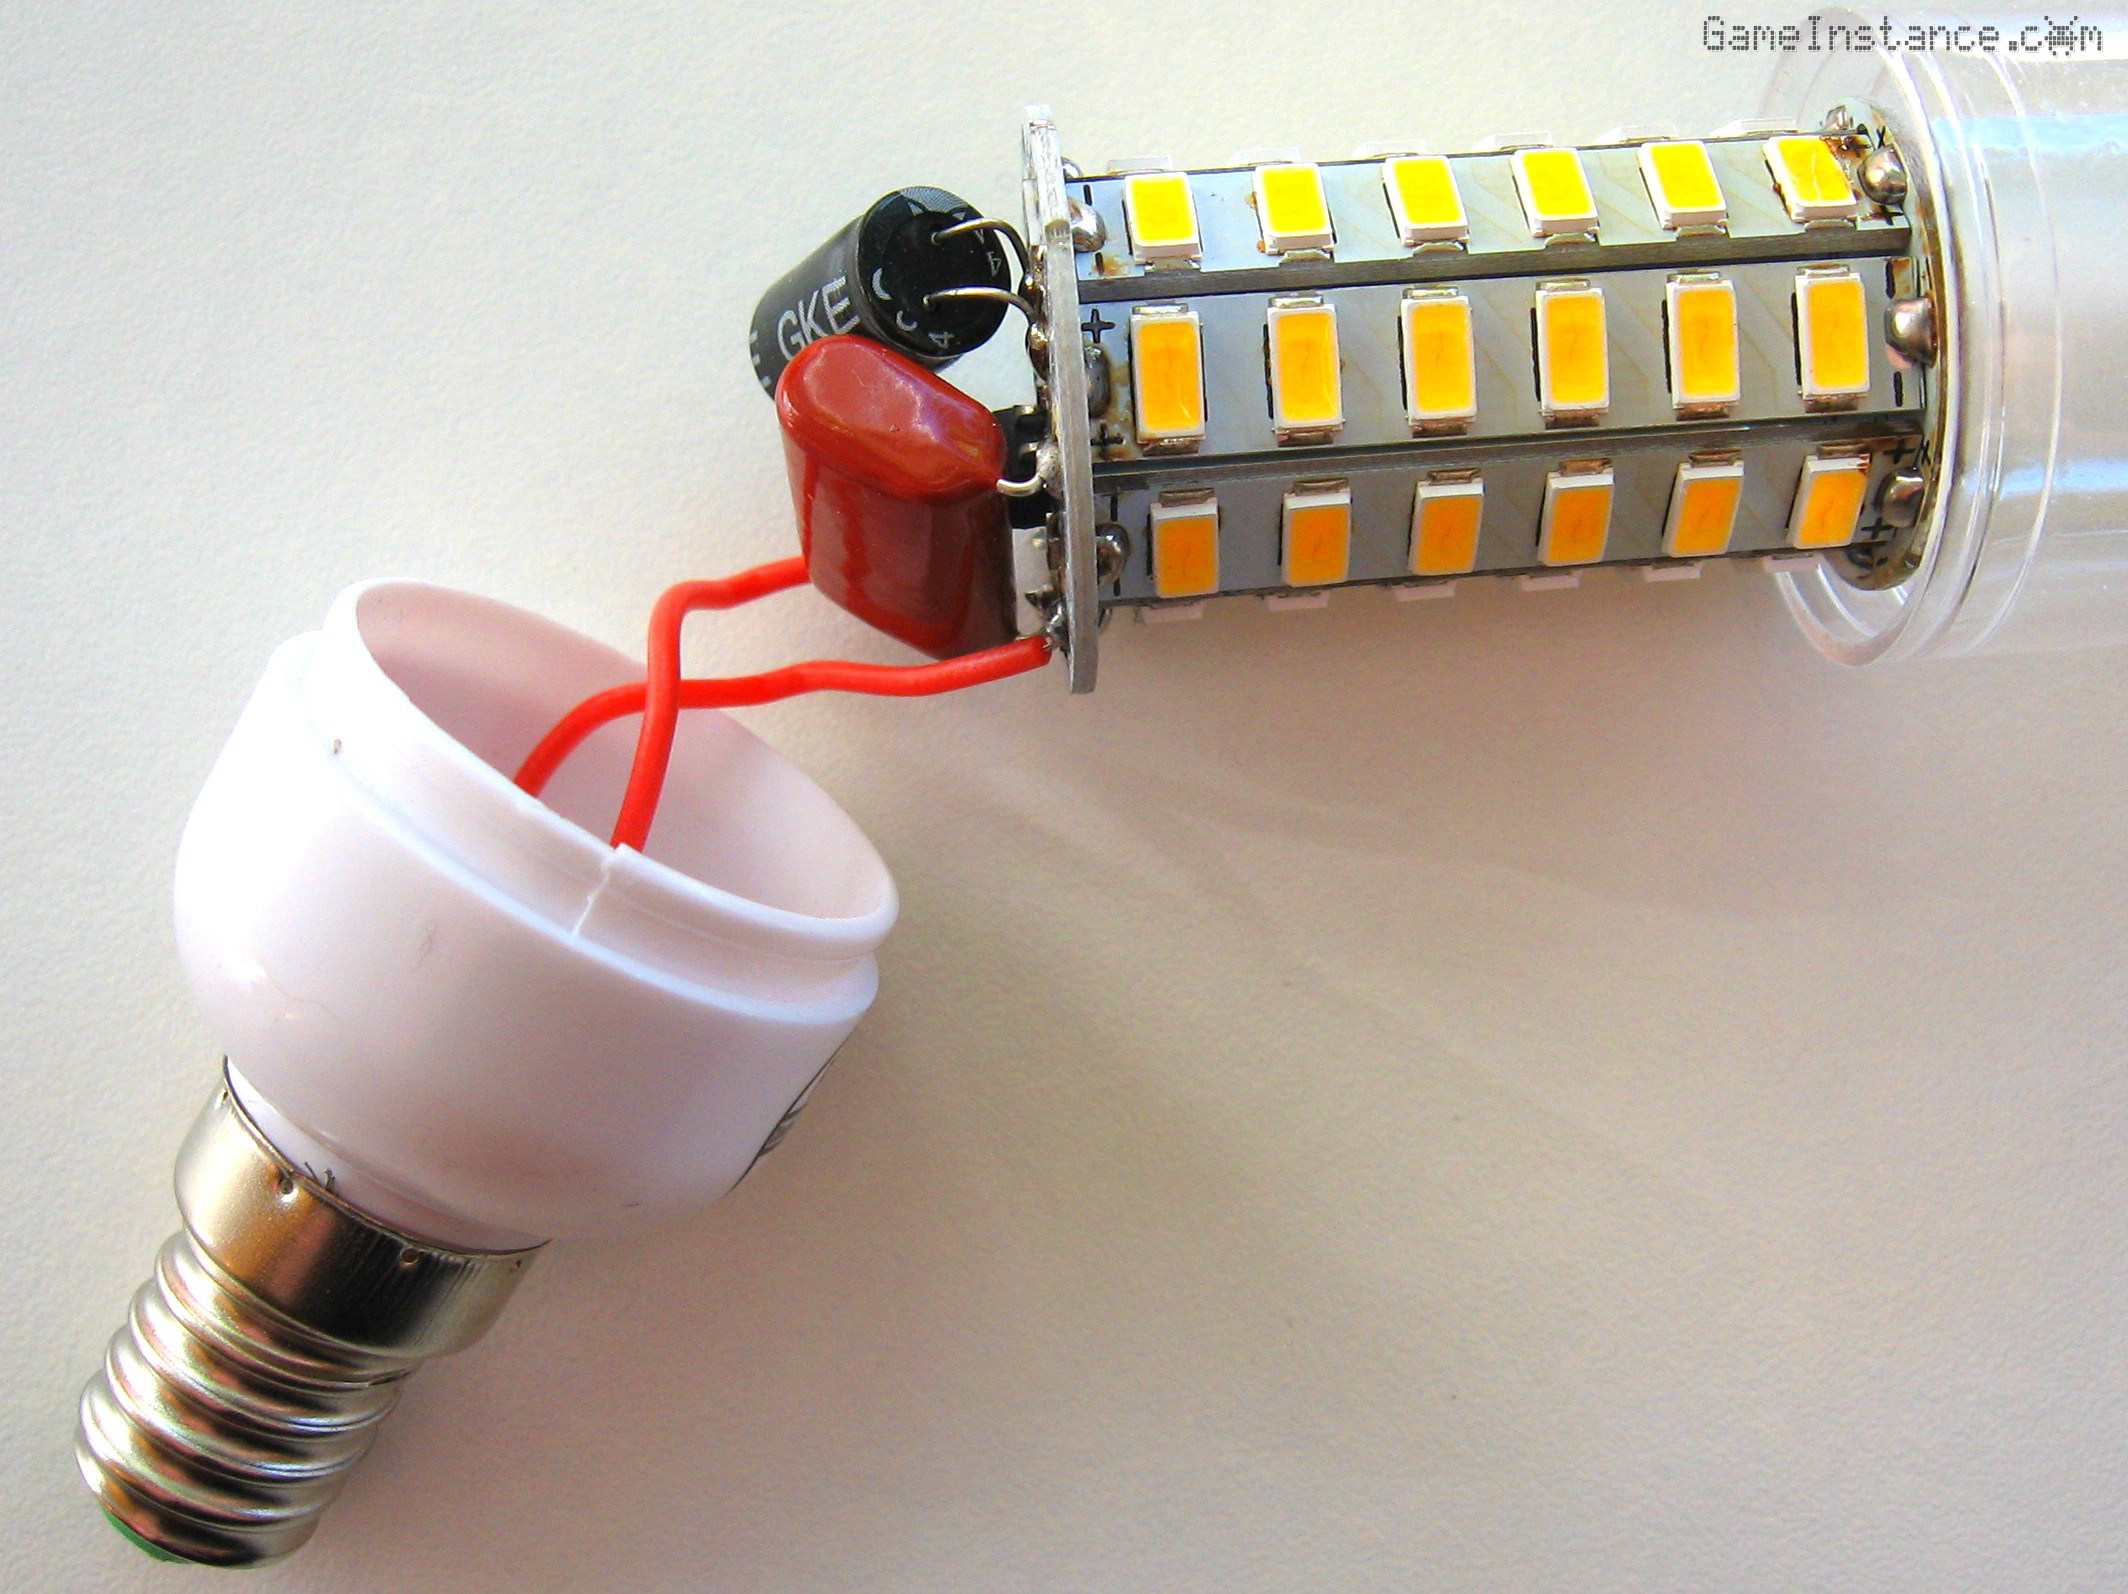 Disassembled consumer LED lamp - Corn cob viewed from the side